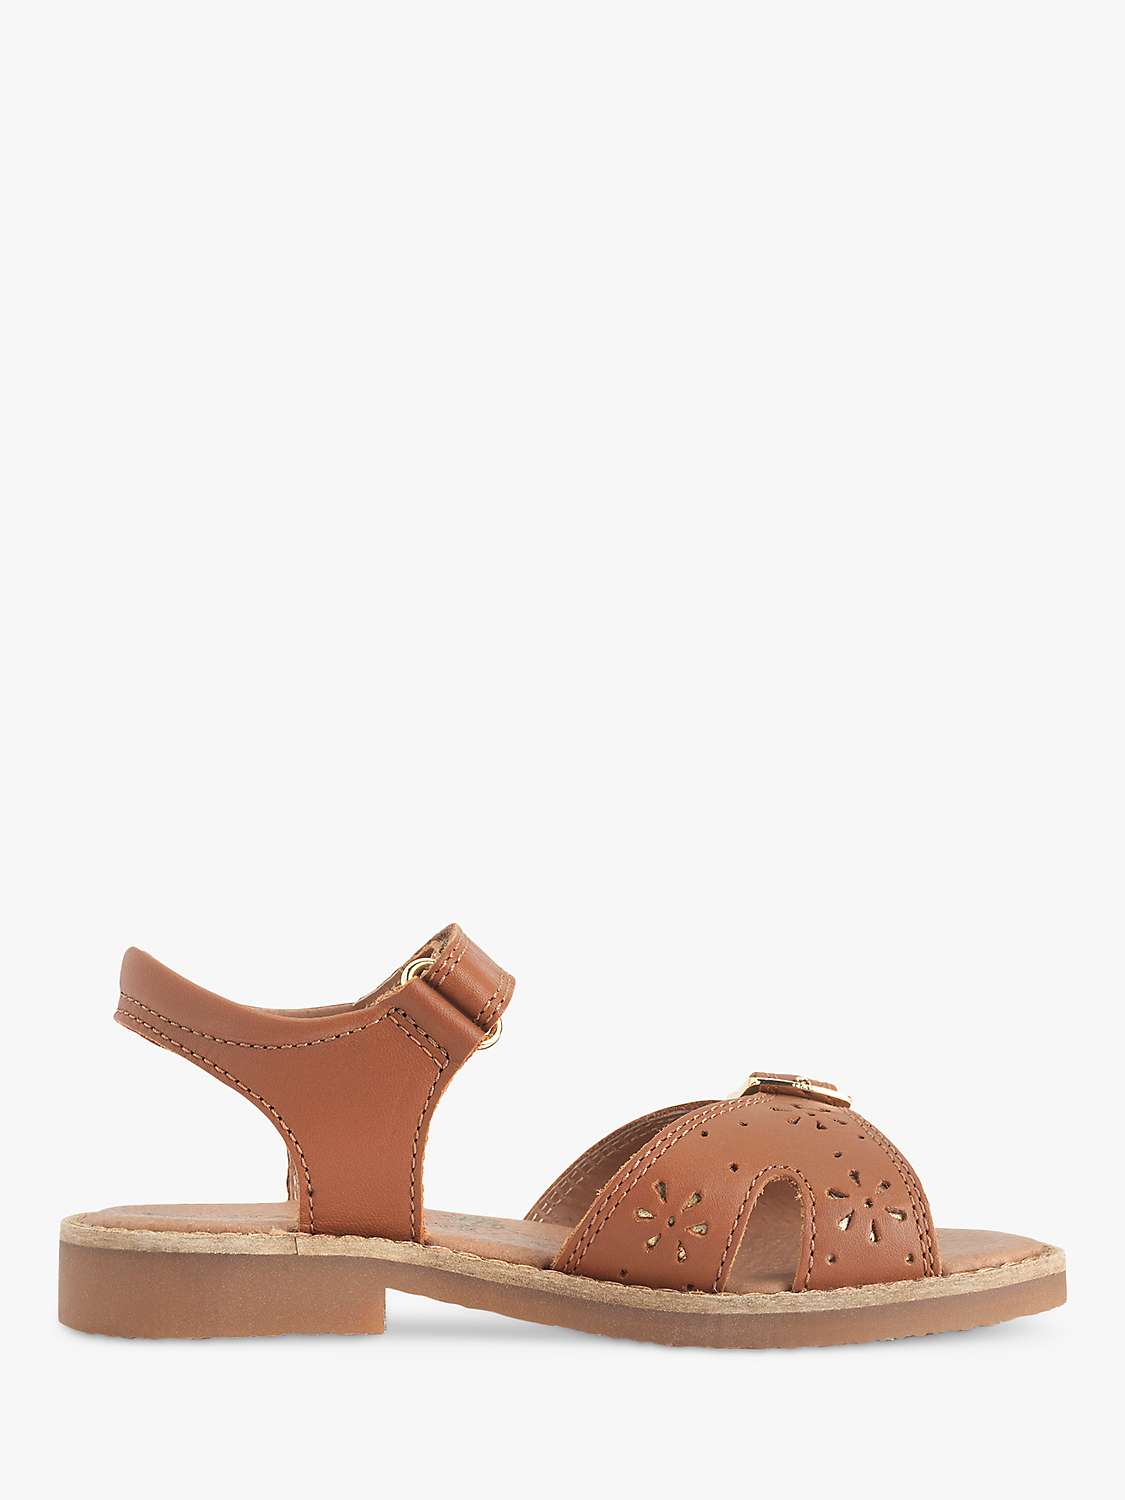 Buy Start-Rite Kids' Holiday Leather Sandals, Tan Online at johnlewis.com